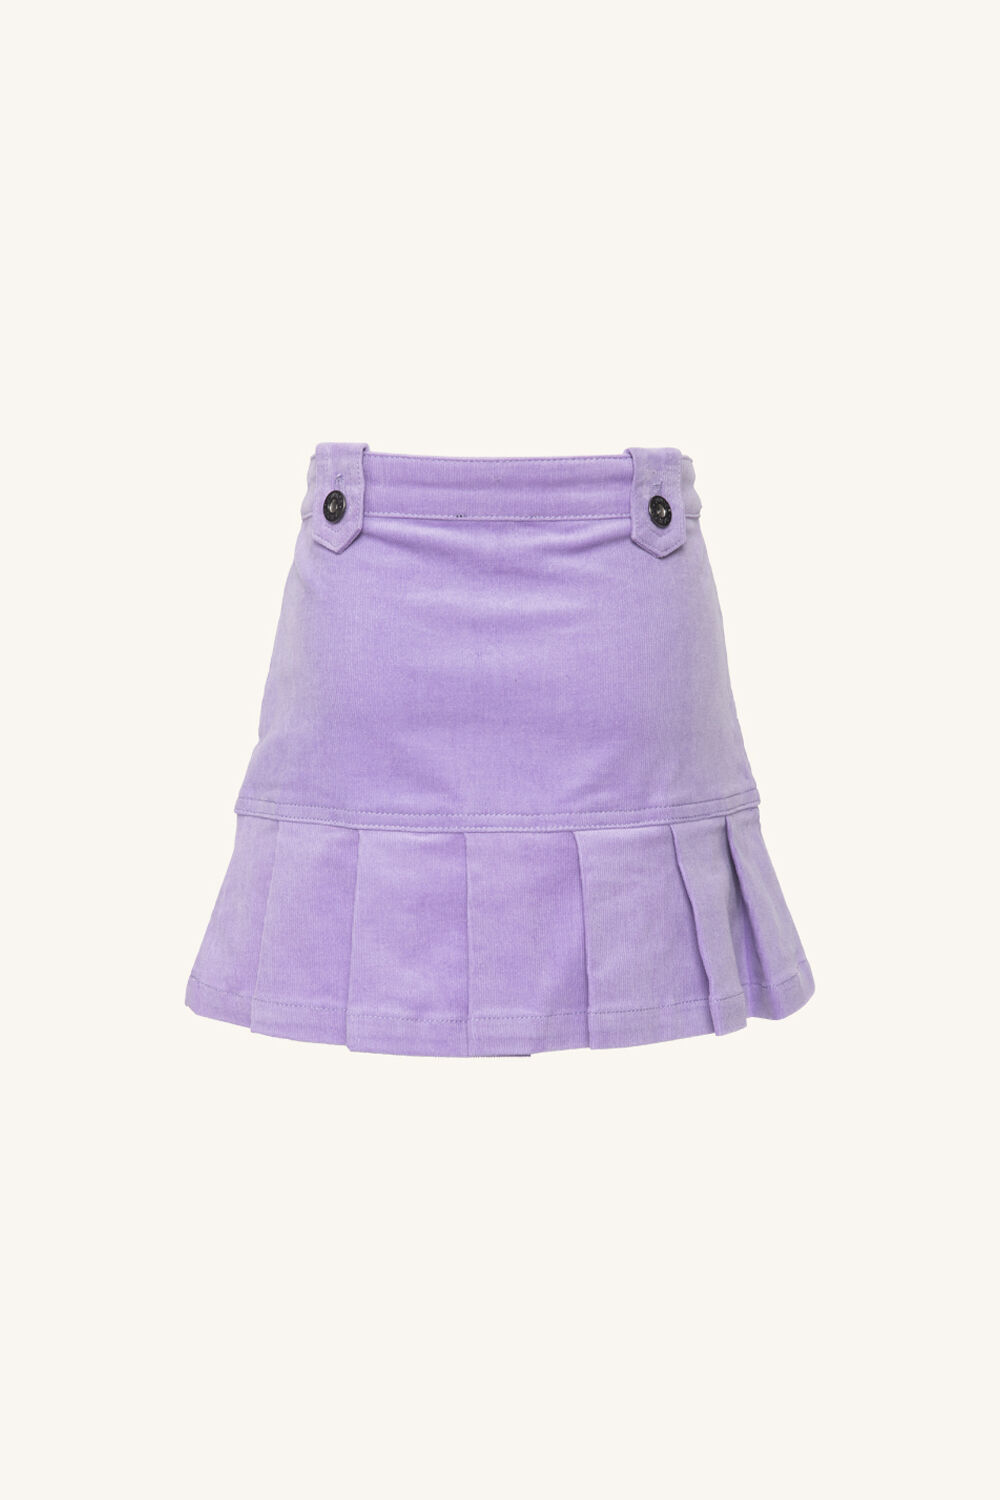 GIRLS KARLA CORD PLEATED SKIRT in colour LILAC CHIFFON